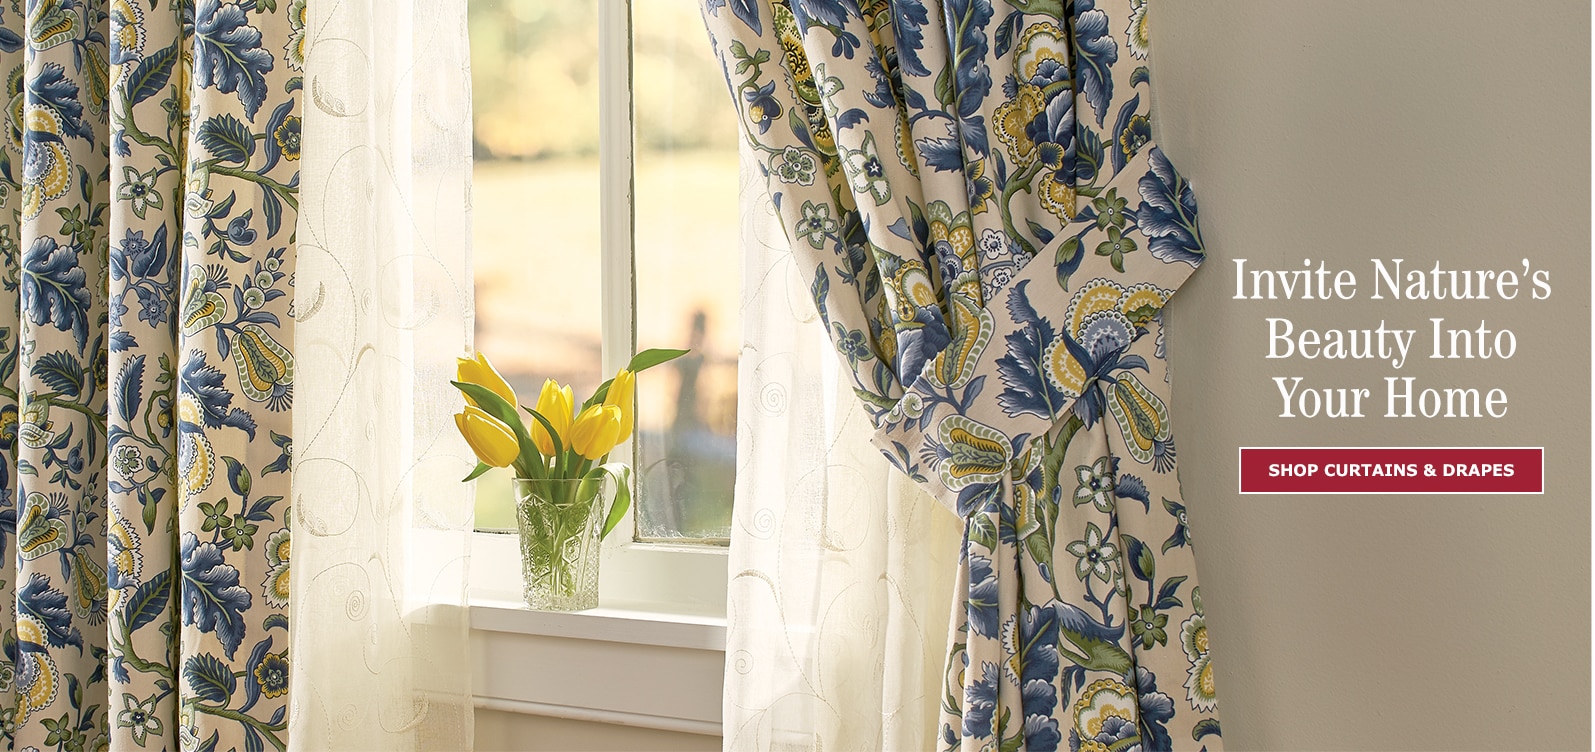 Invite Nature's Beauty Into Your Home. Shop Curtains & Drapes